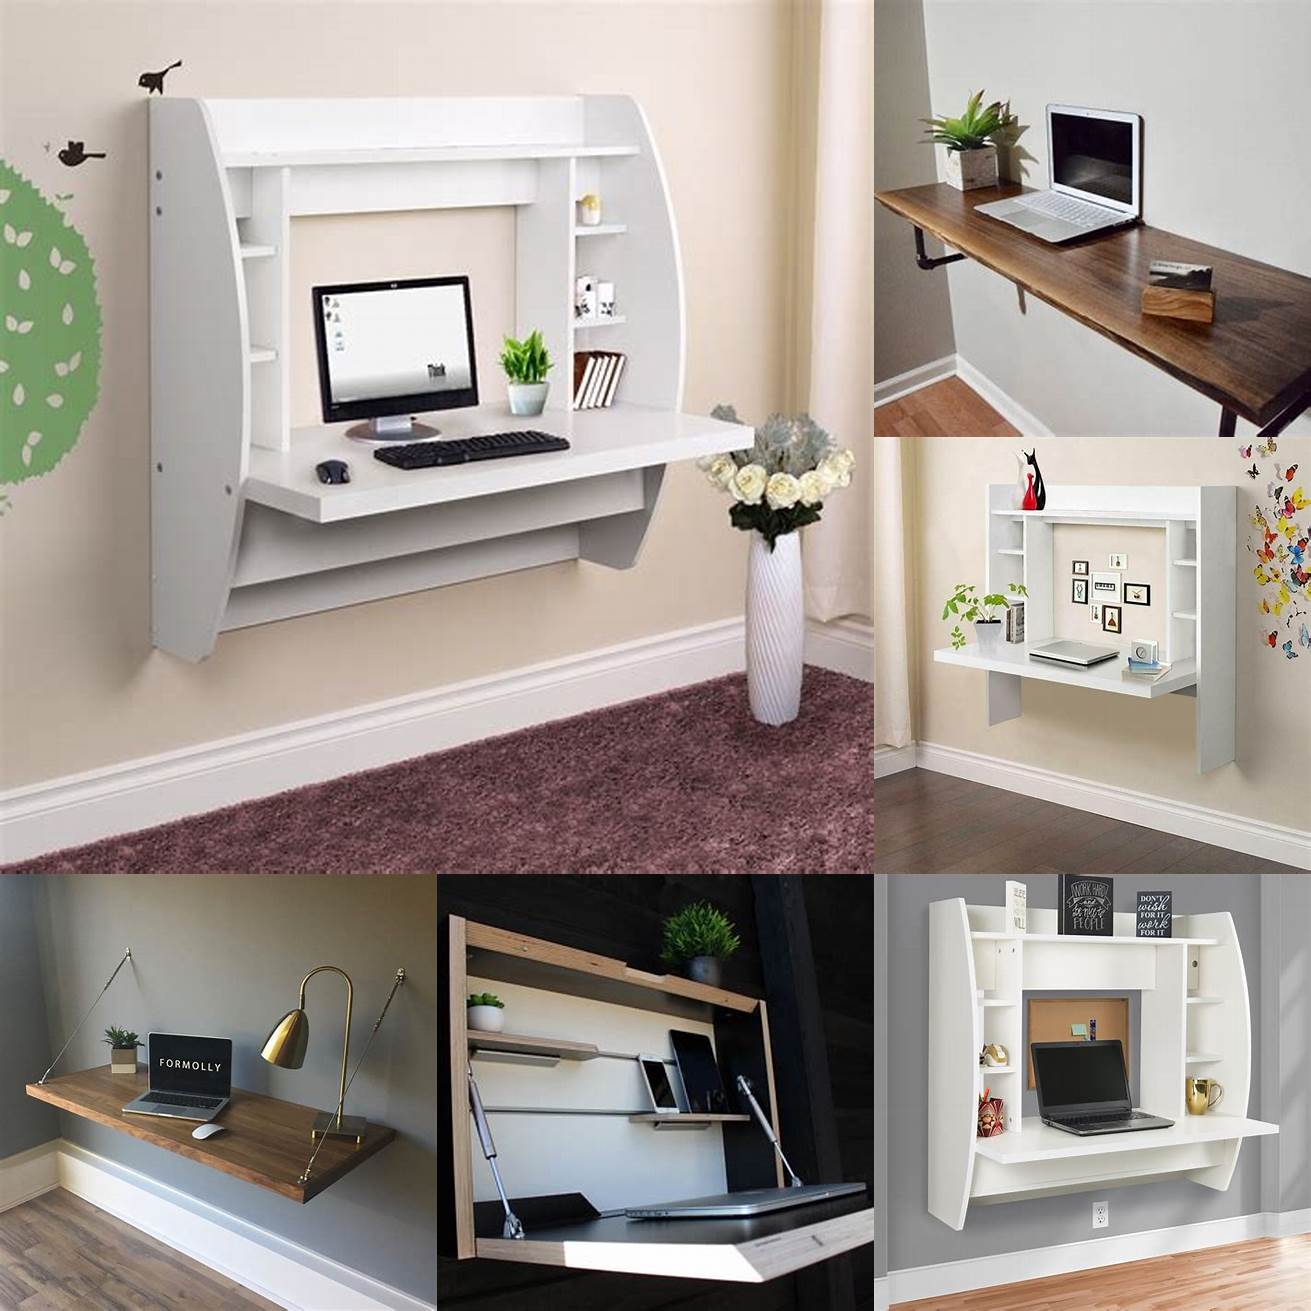 A wall-mounted desk is a great option for those who work from home but dont have the space for a full-sized desk